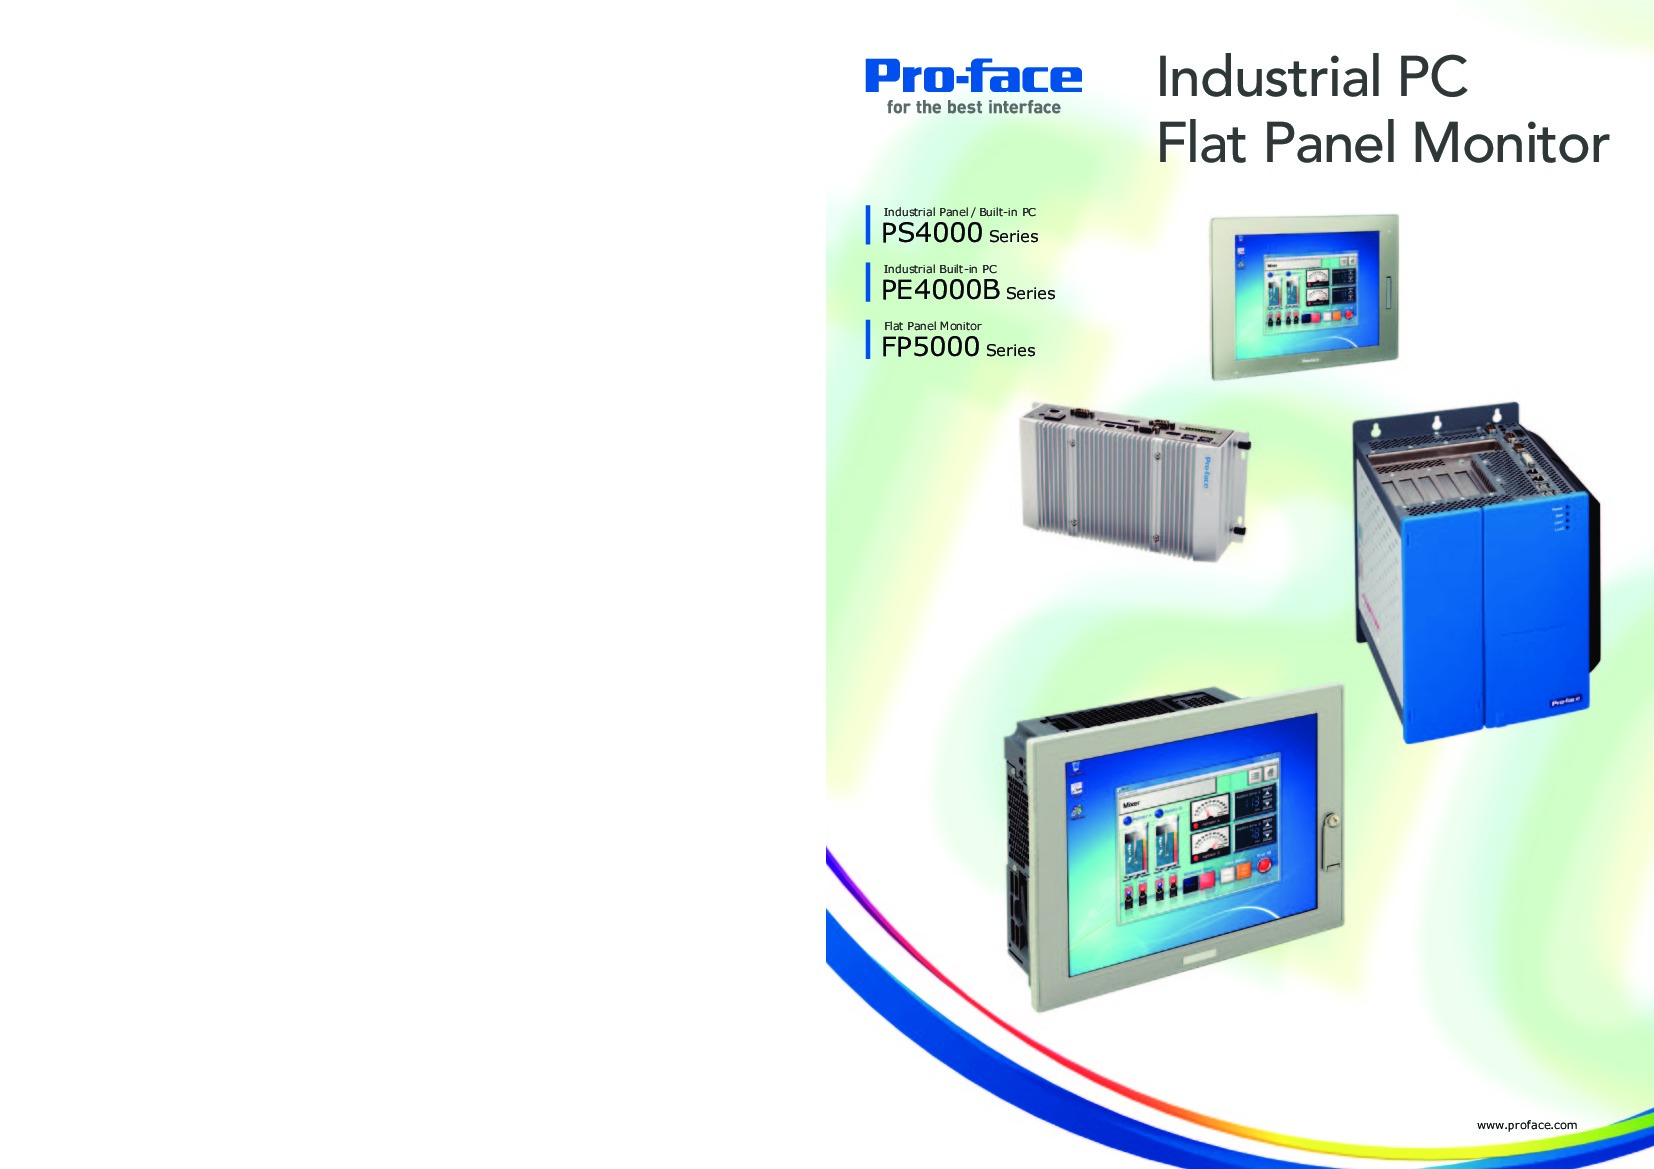 First Page Image of PFXPP160DA25P04N00 PS4000 Series Pro-Face Catalog.pdf